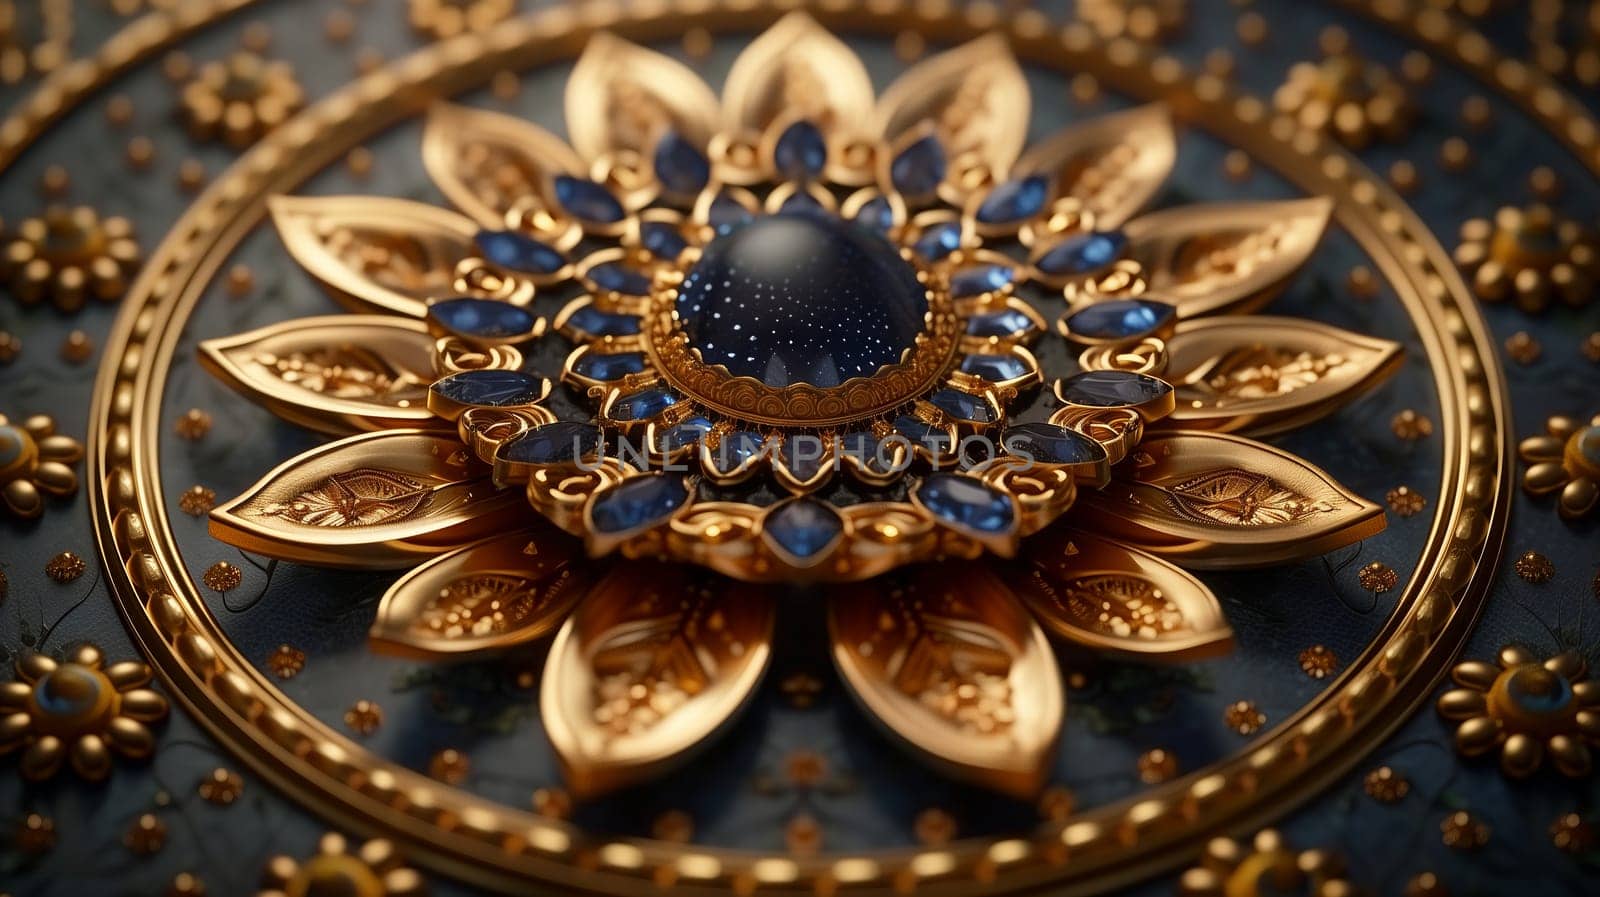 A closeup shot showcasing a gold flower ornament with blue stones on a black background, highlighting the intricate metalwork and symmetrical pattern of the jewelry piece